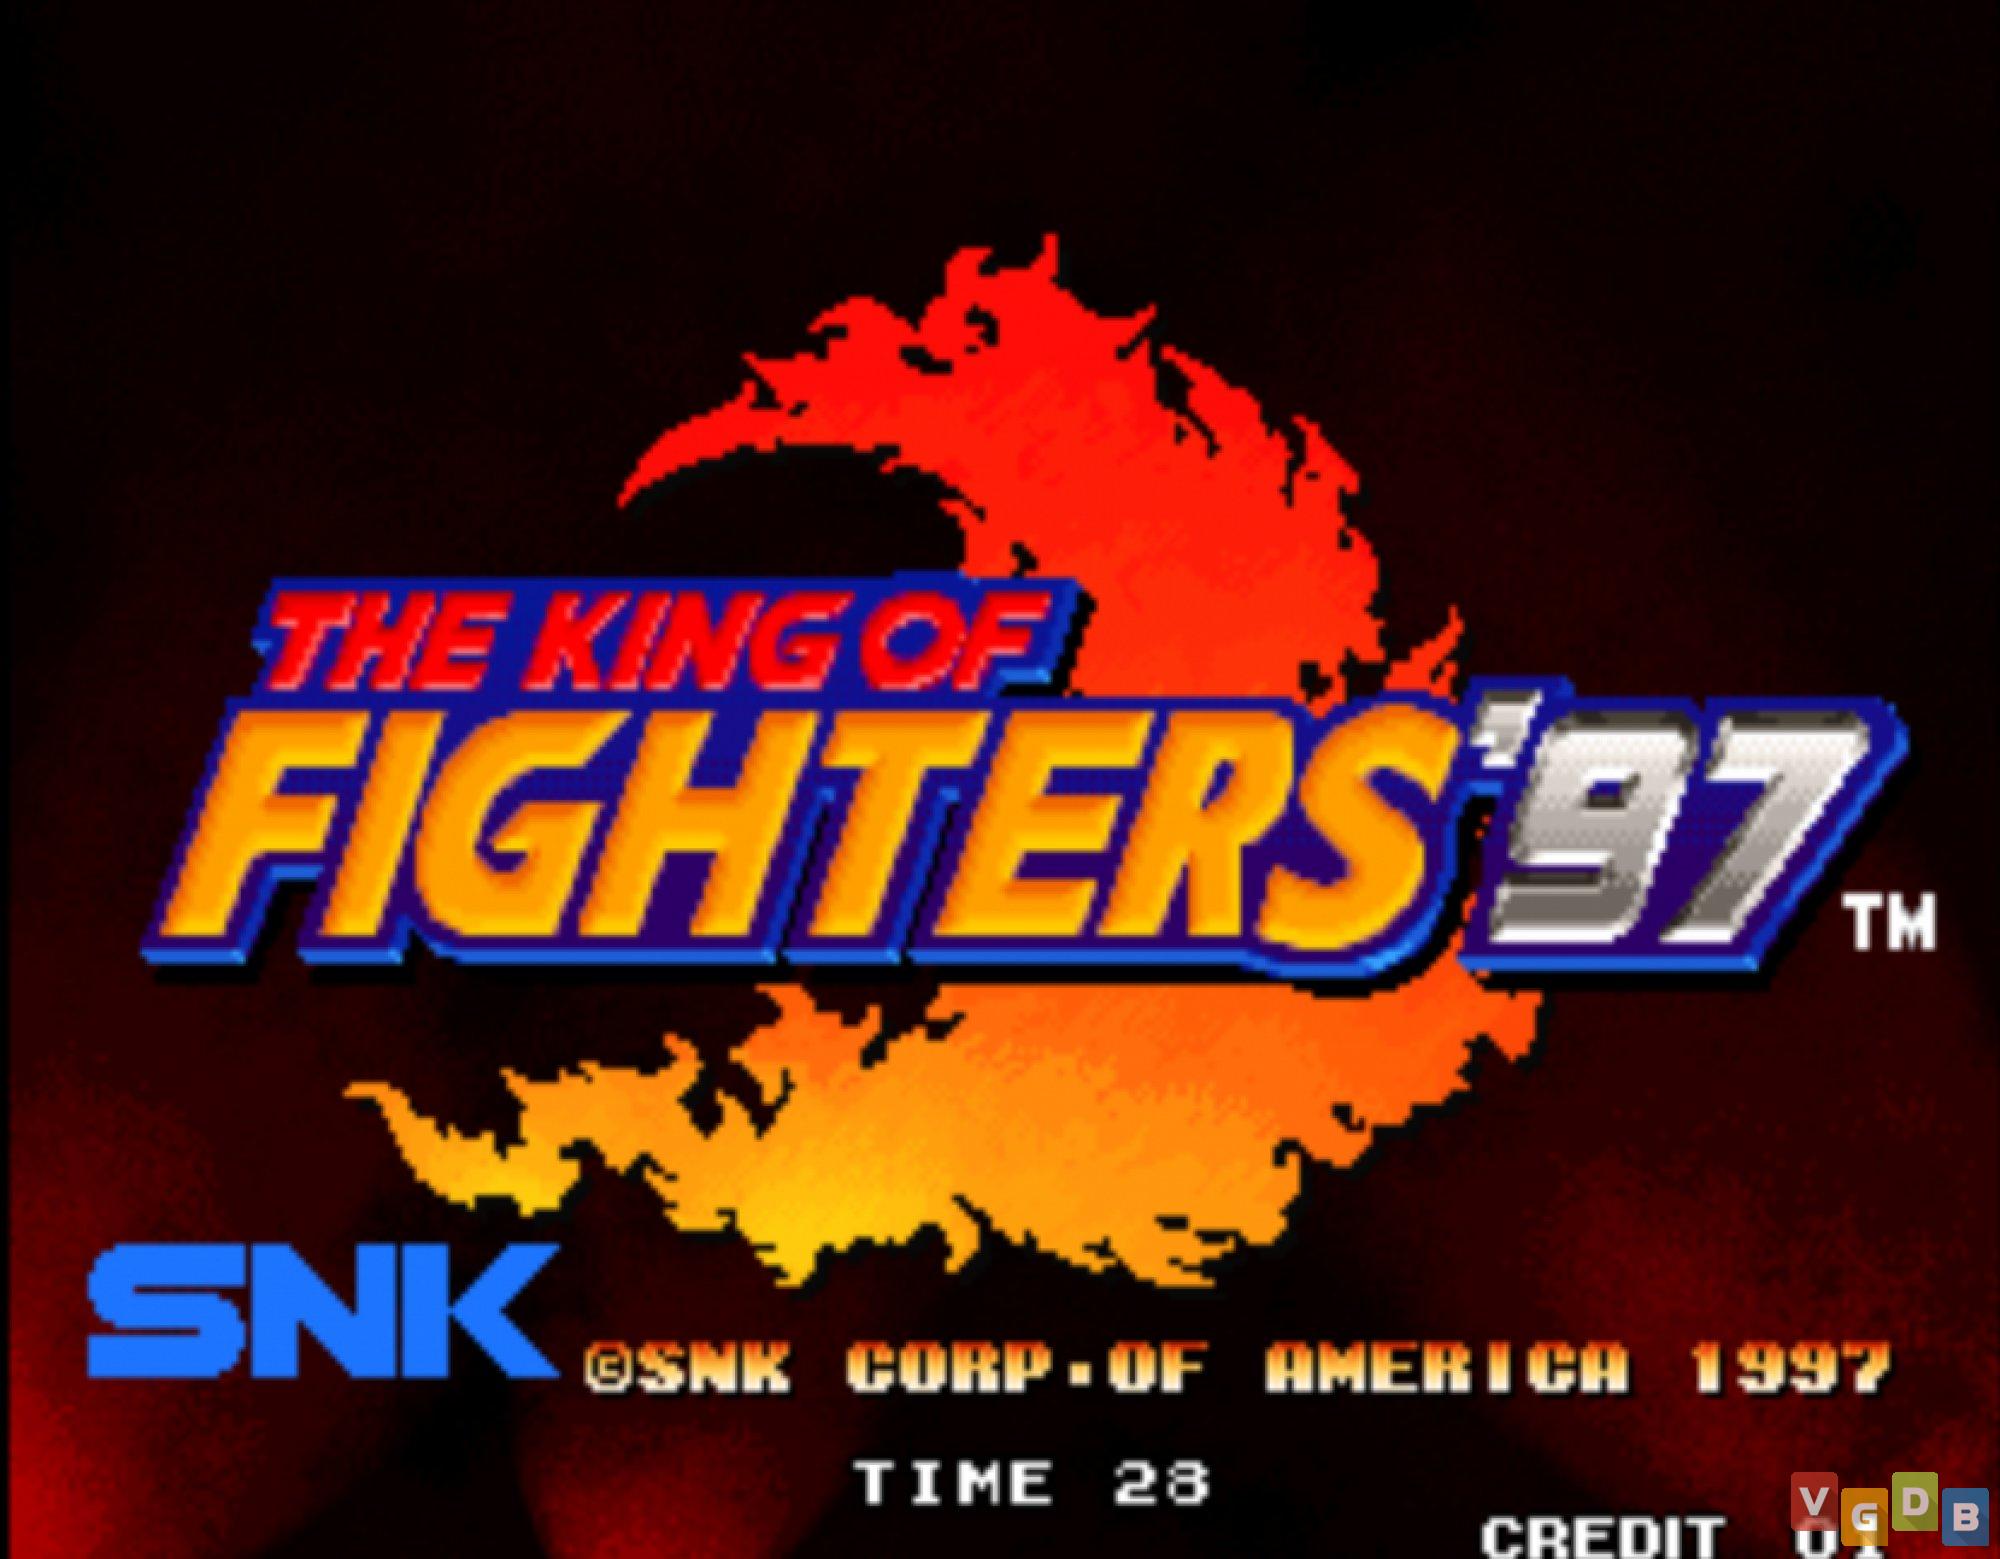 the king of fighters 97 game download